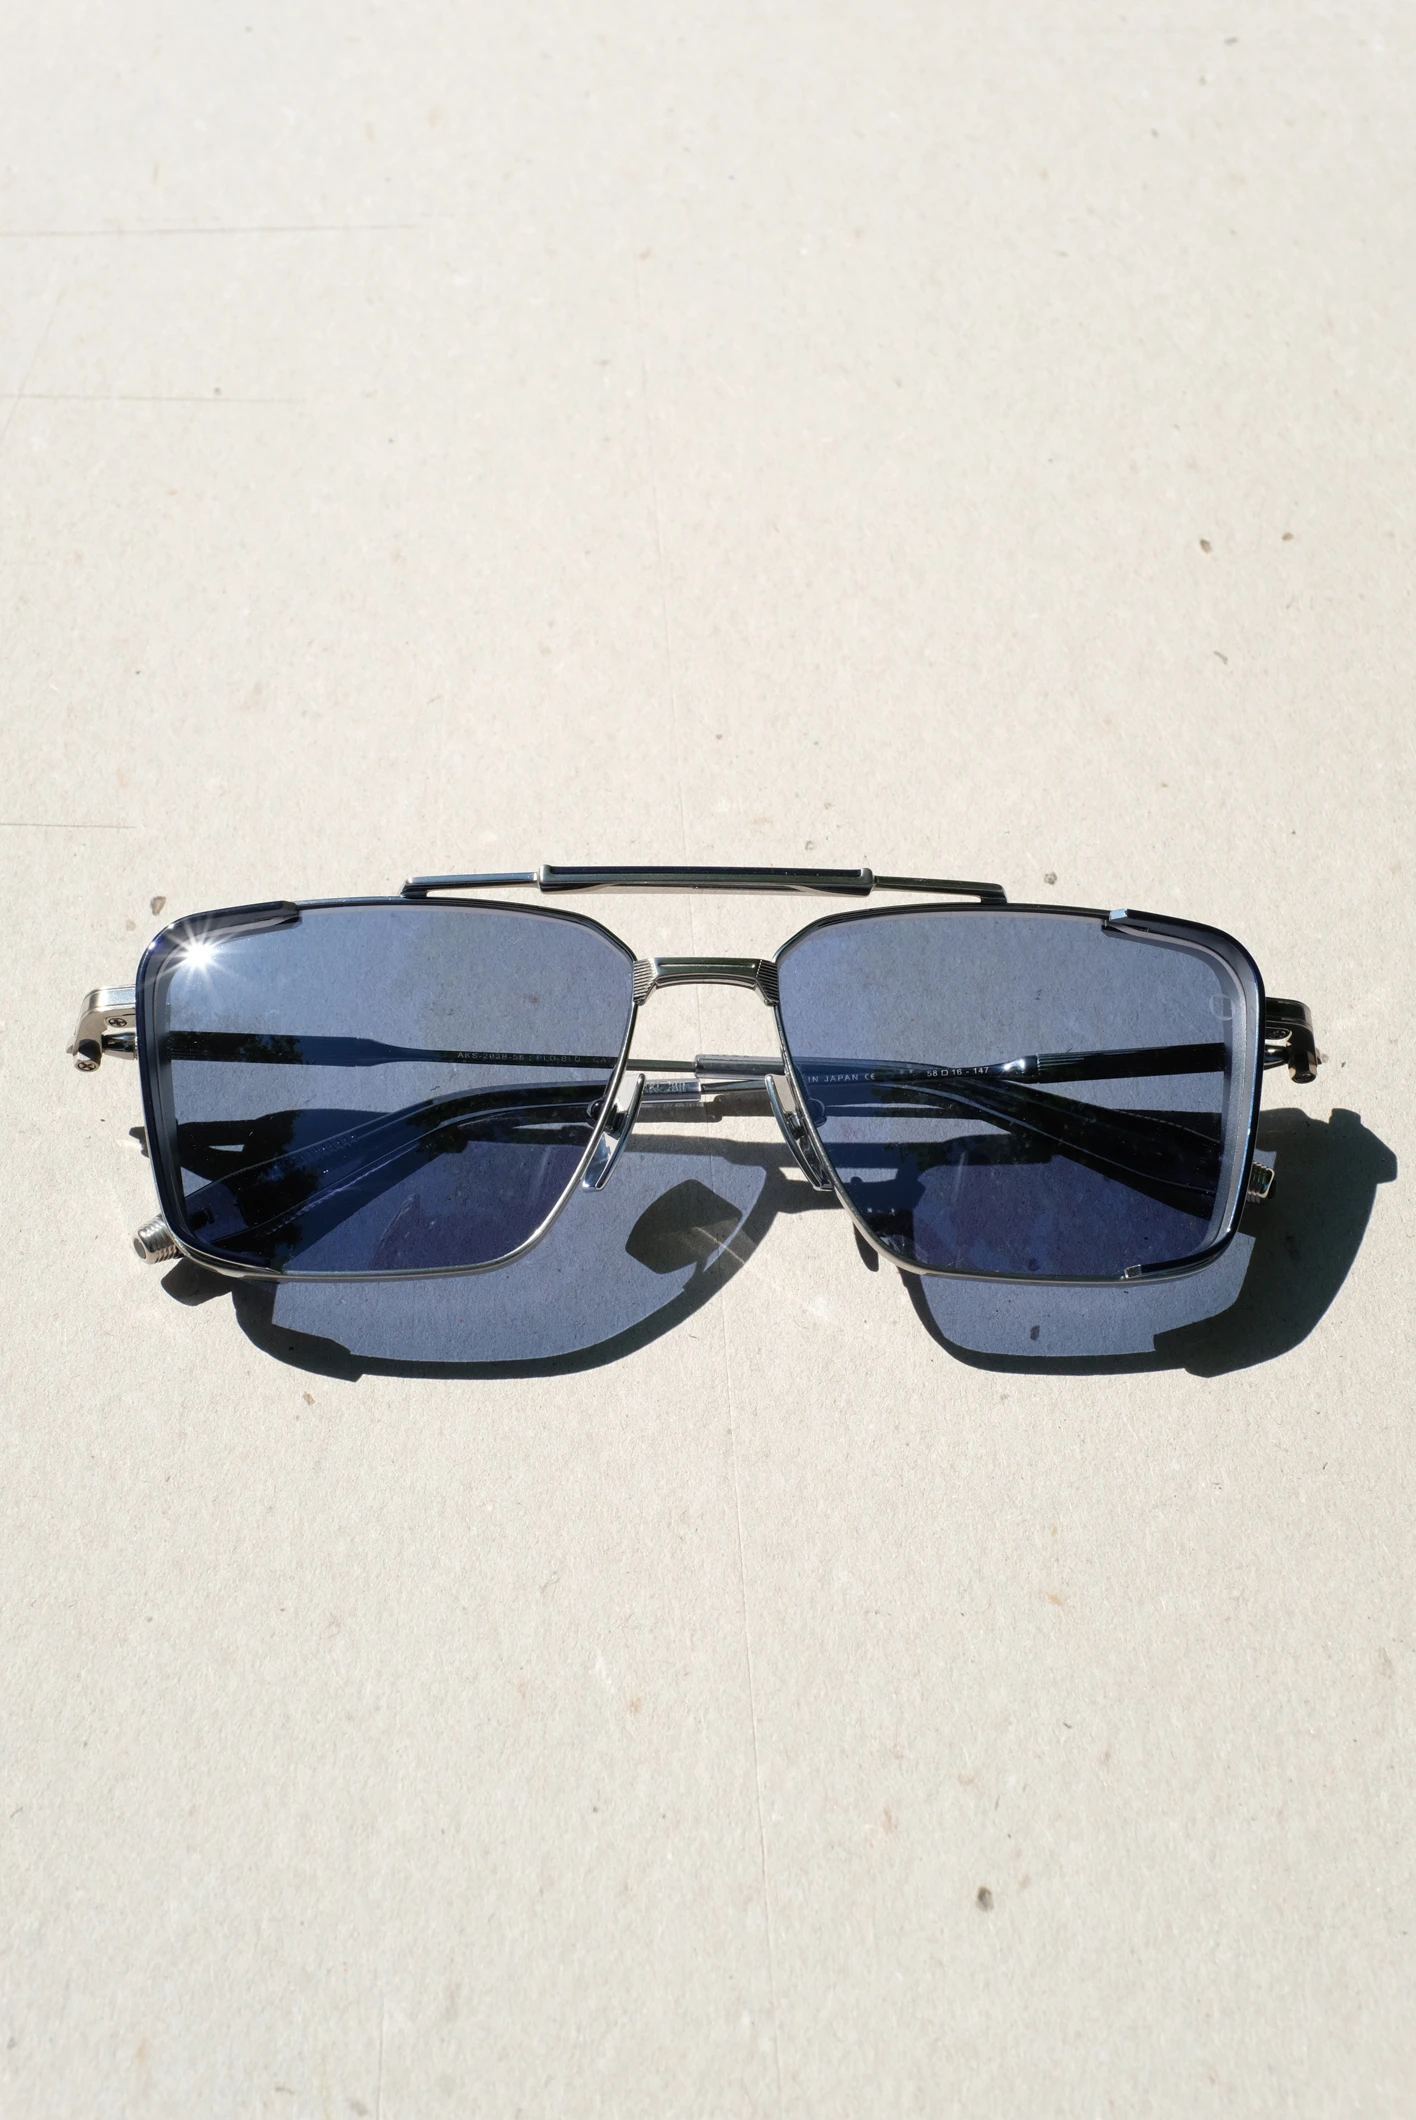 Akoni Hera sunglasses, aviator style frame made of black/silver titanium palladium and with blue lenses. Made in Japan.